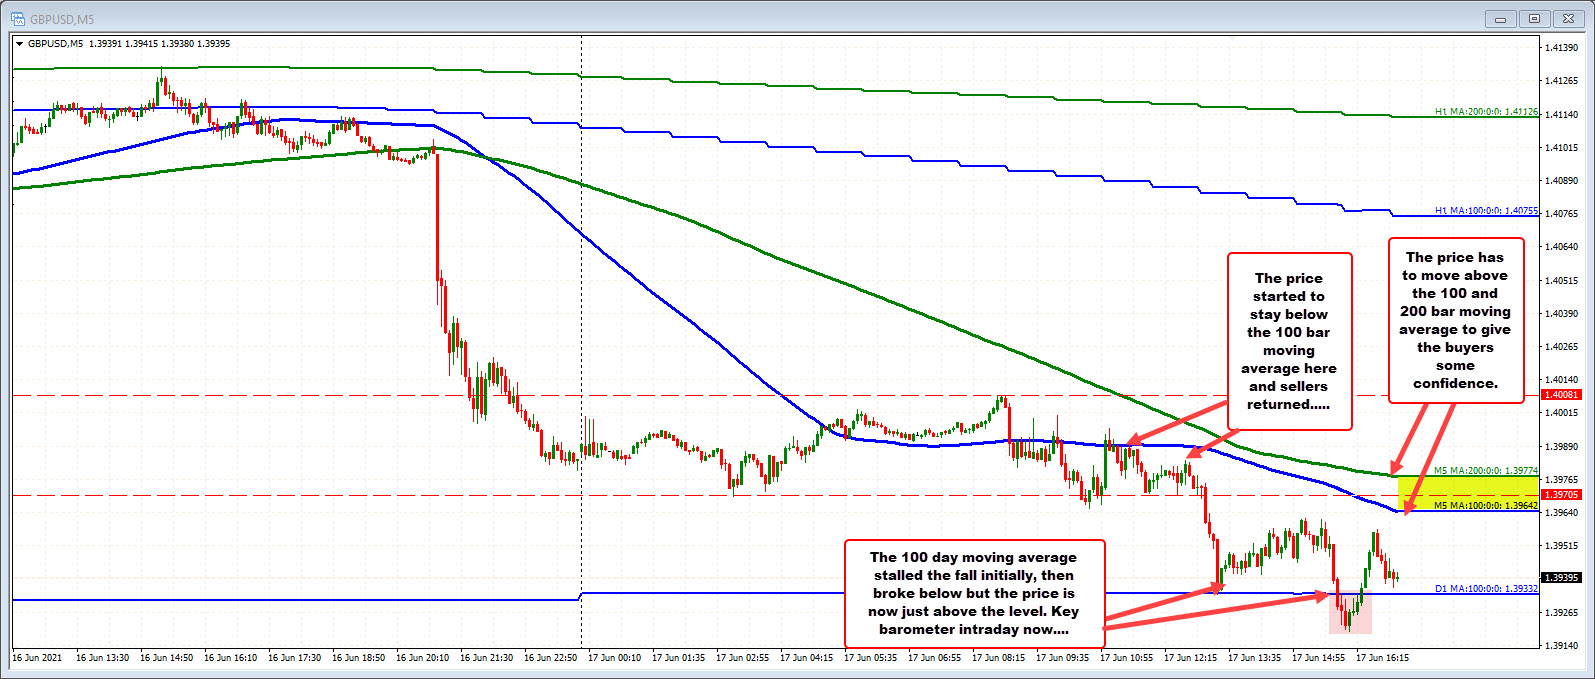 GBPUSD on the five minute chart